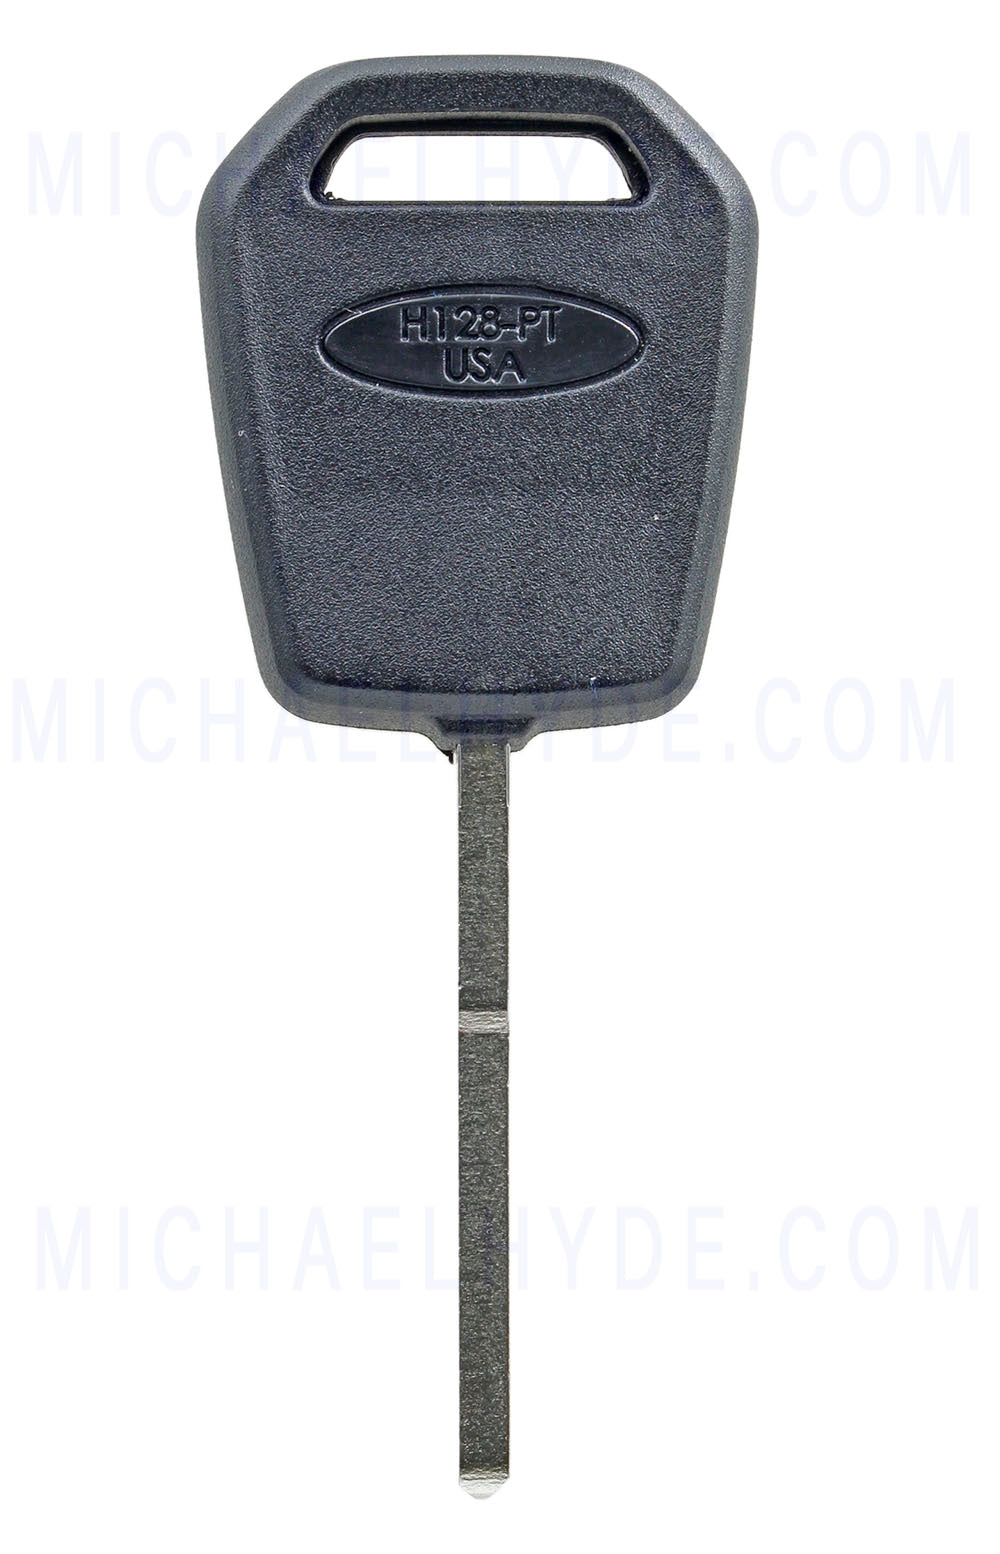 ILCO Ford 128 Bit Transponder Key - HU101 - AX00012124 - Edge, Expedition, Explorer, F-150, Fusion, Mustang, Continental and more